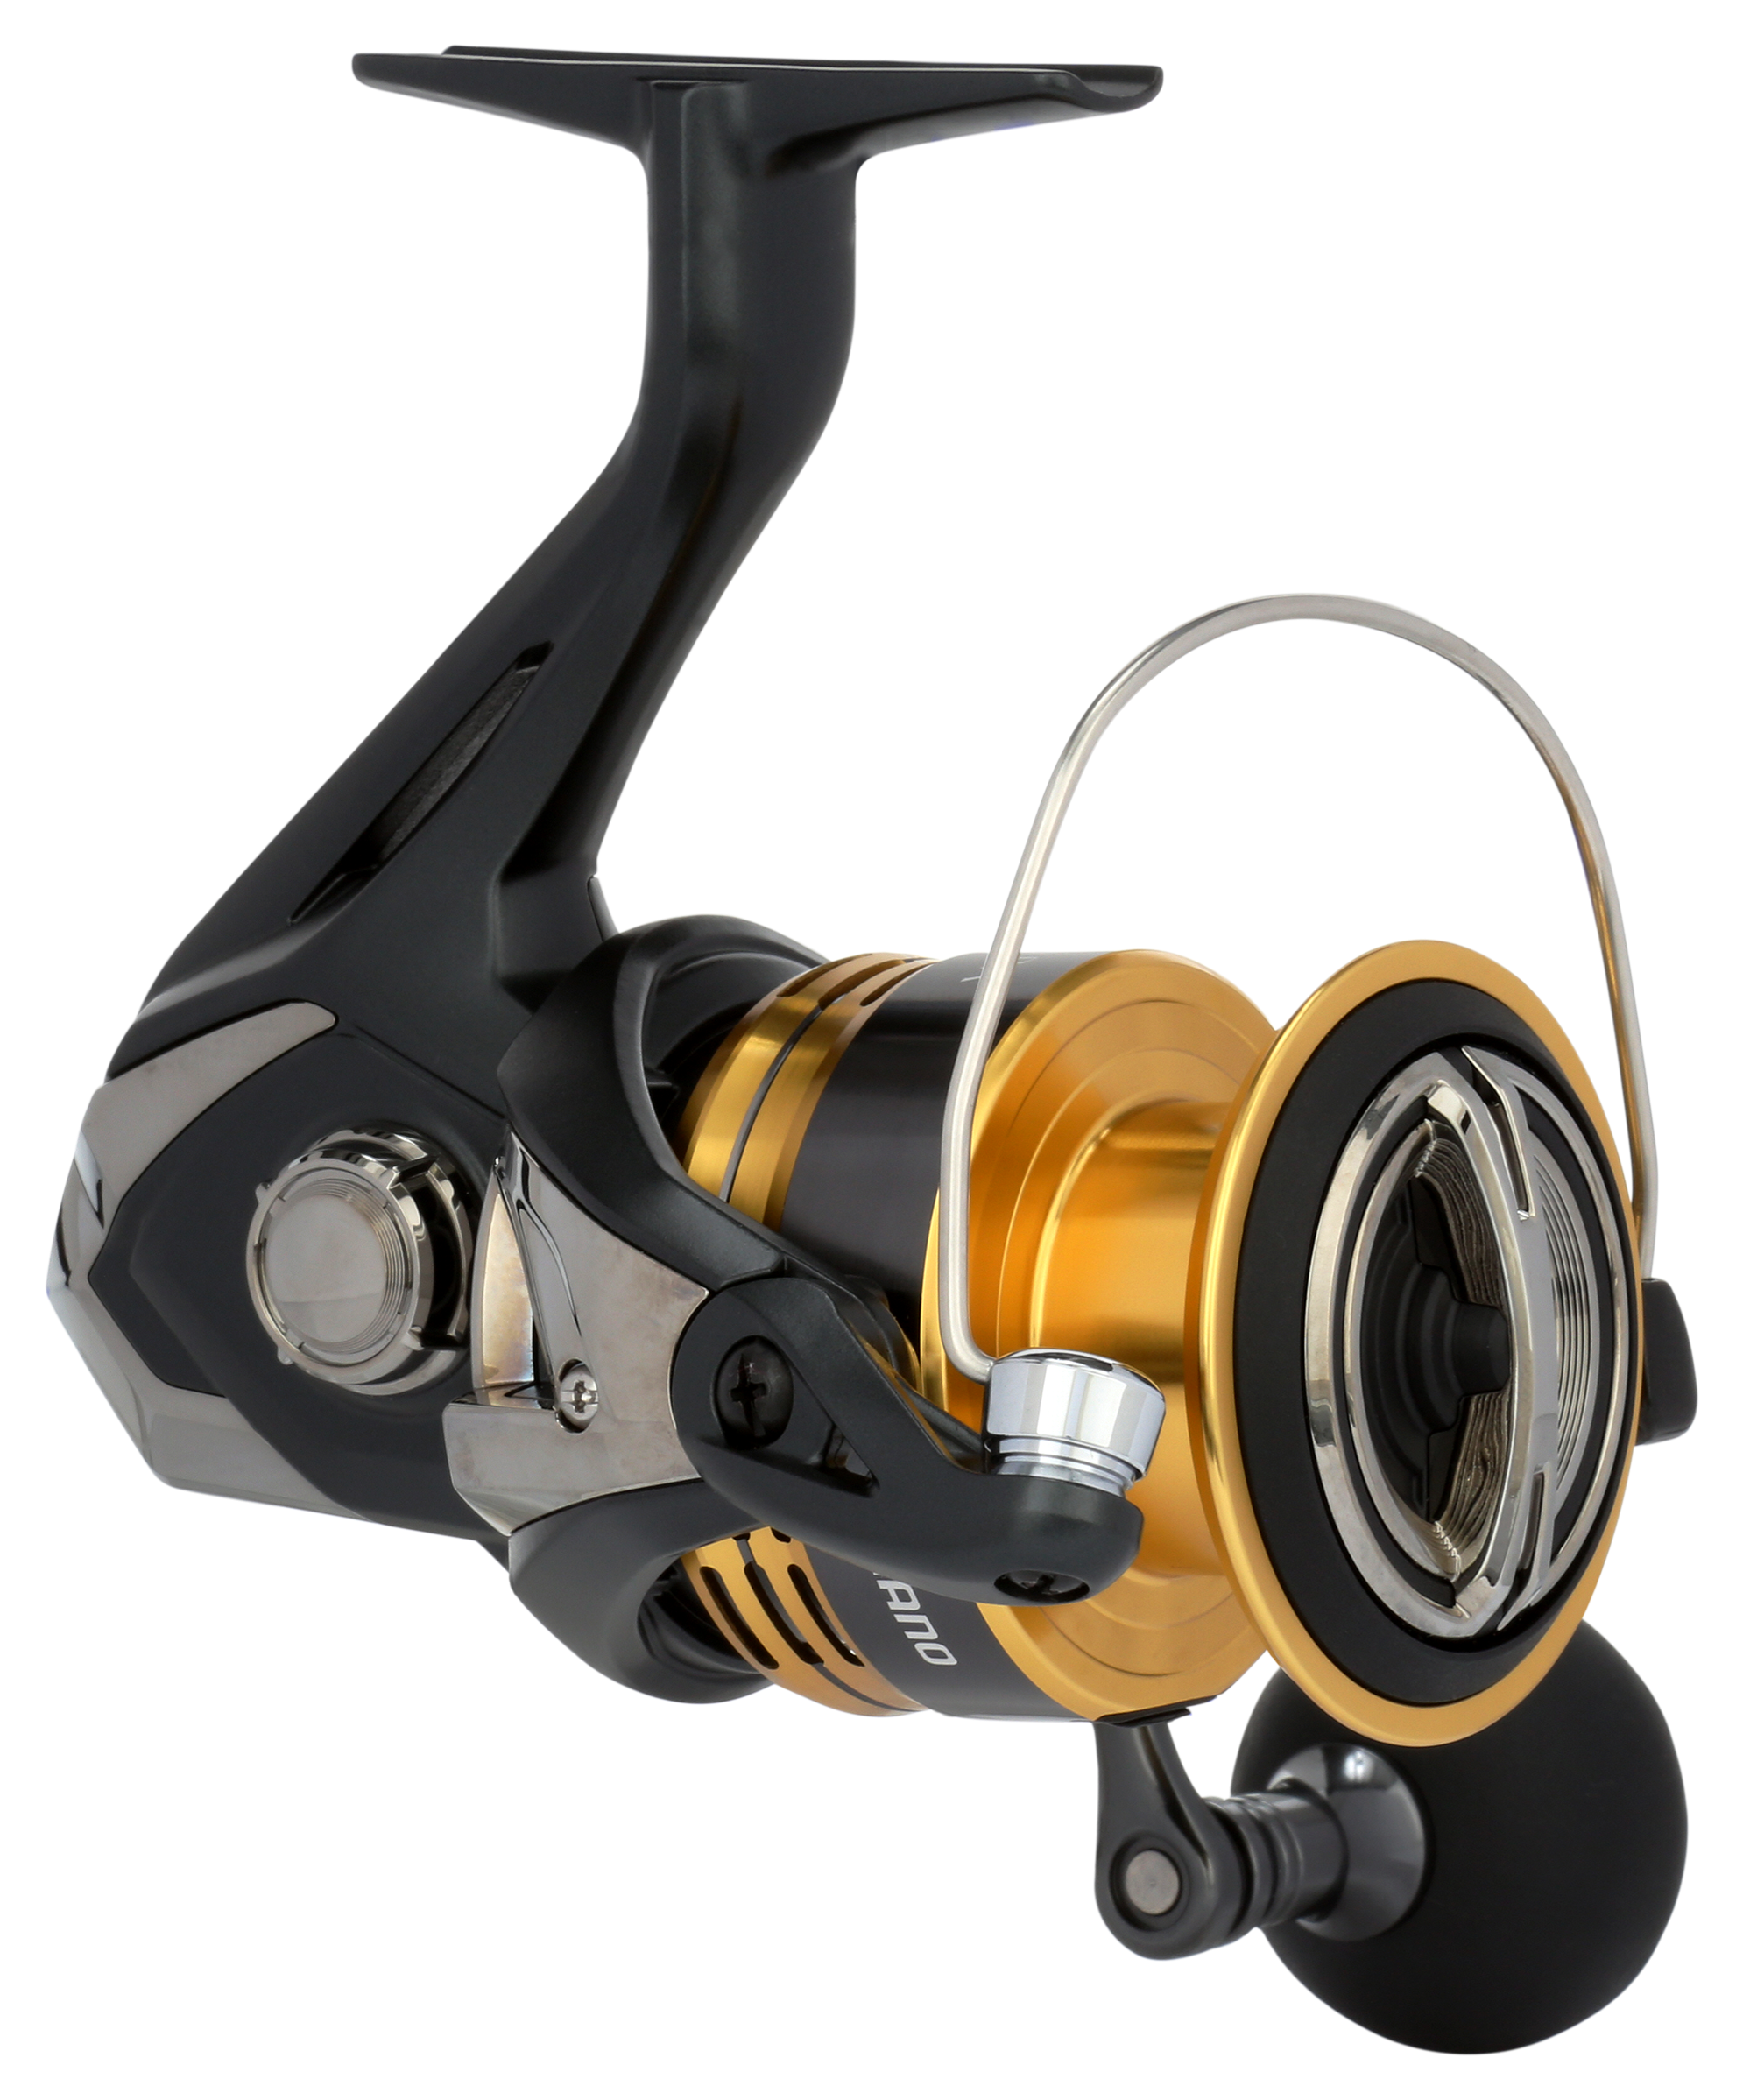 Shimano Sahara 2500s Fi HG Fishing Reel From Spinning for sale online